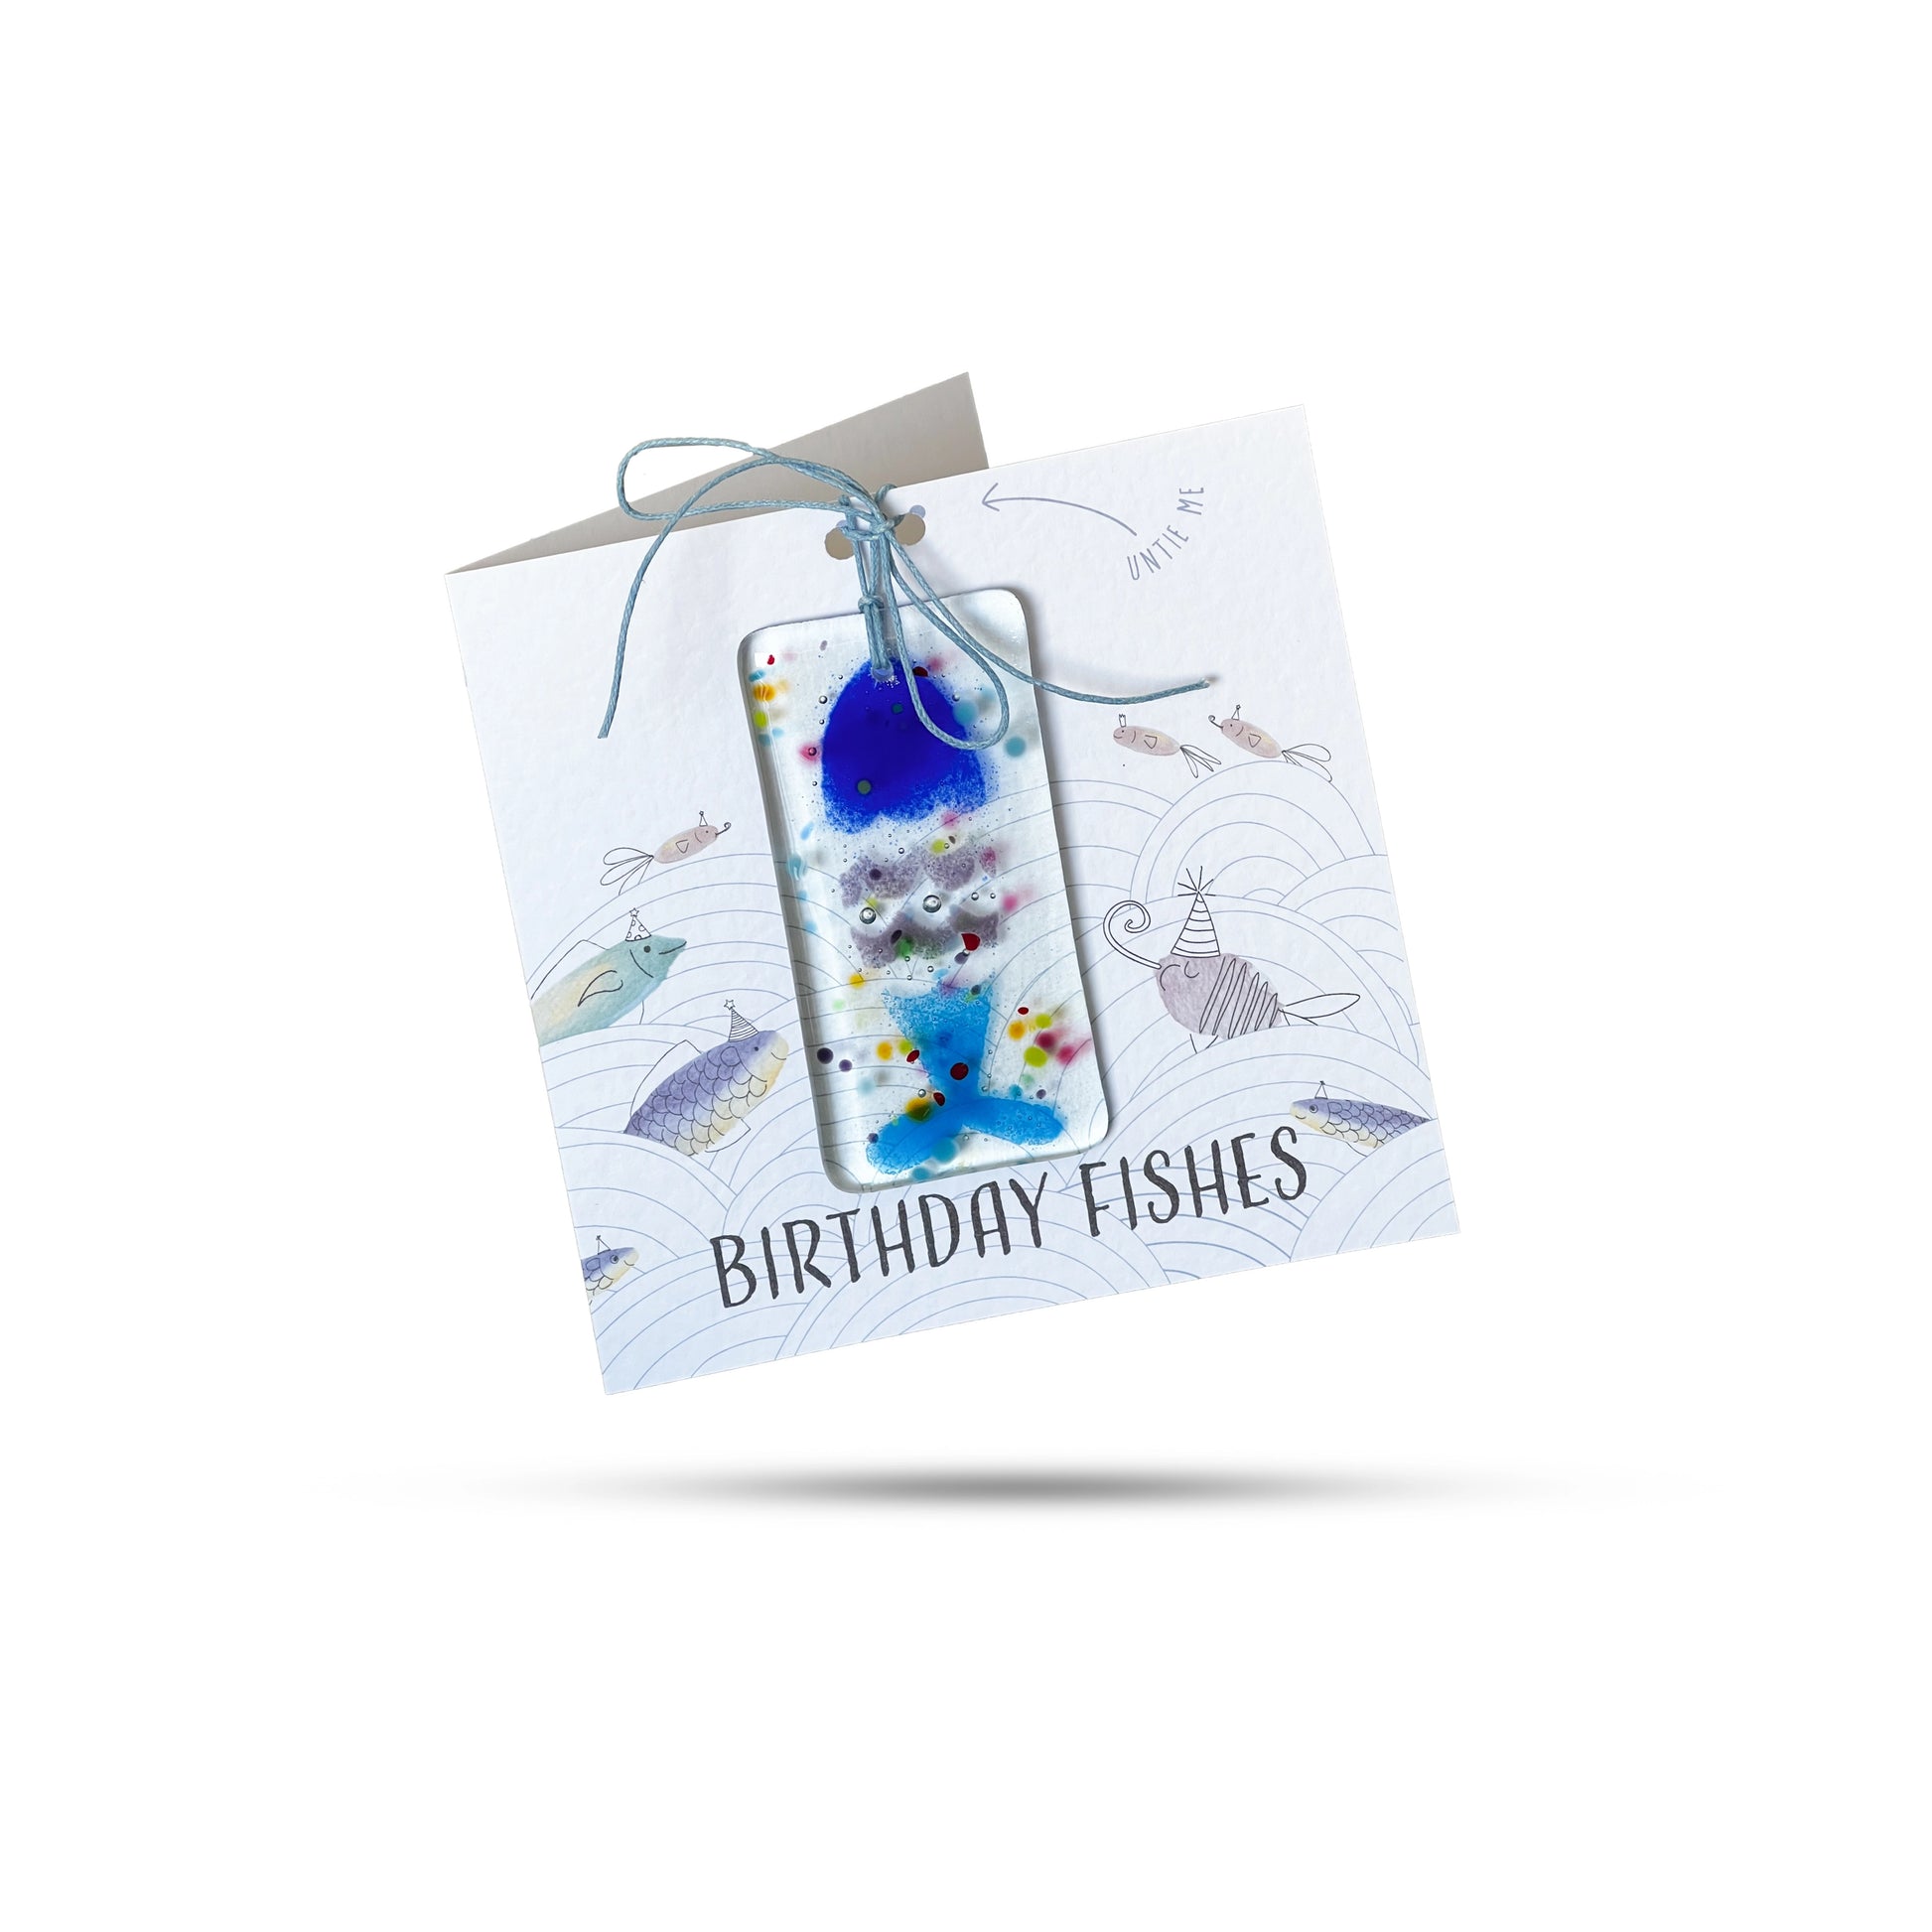 Birthday Fishes (Linear) Greeting Card With Fused Glass Gift - Mellow Monkey